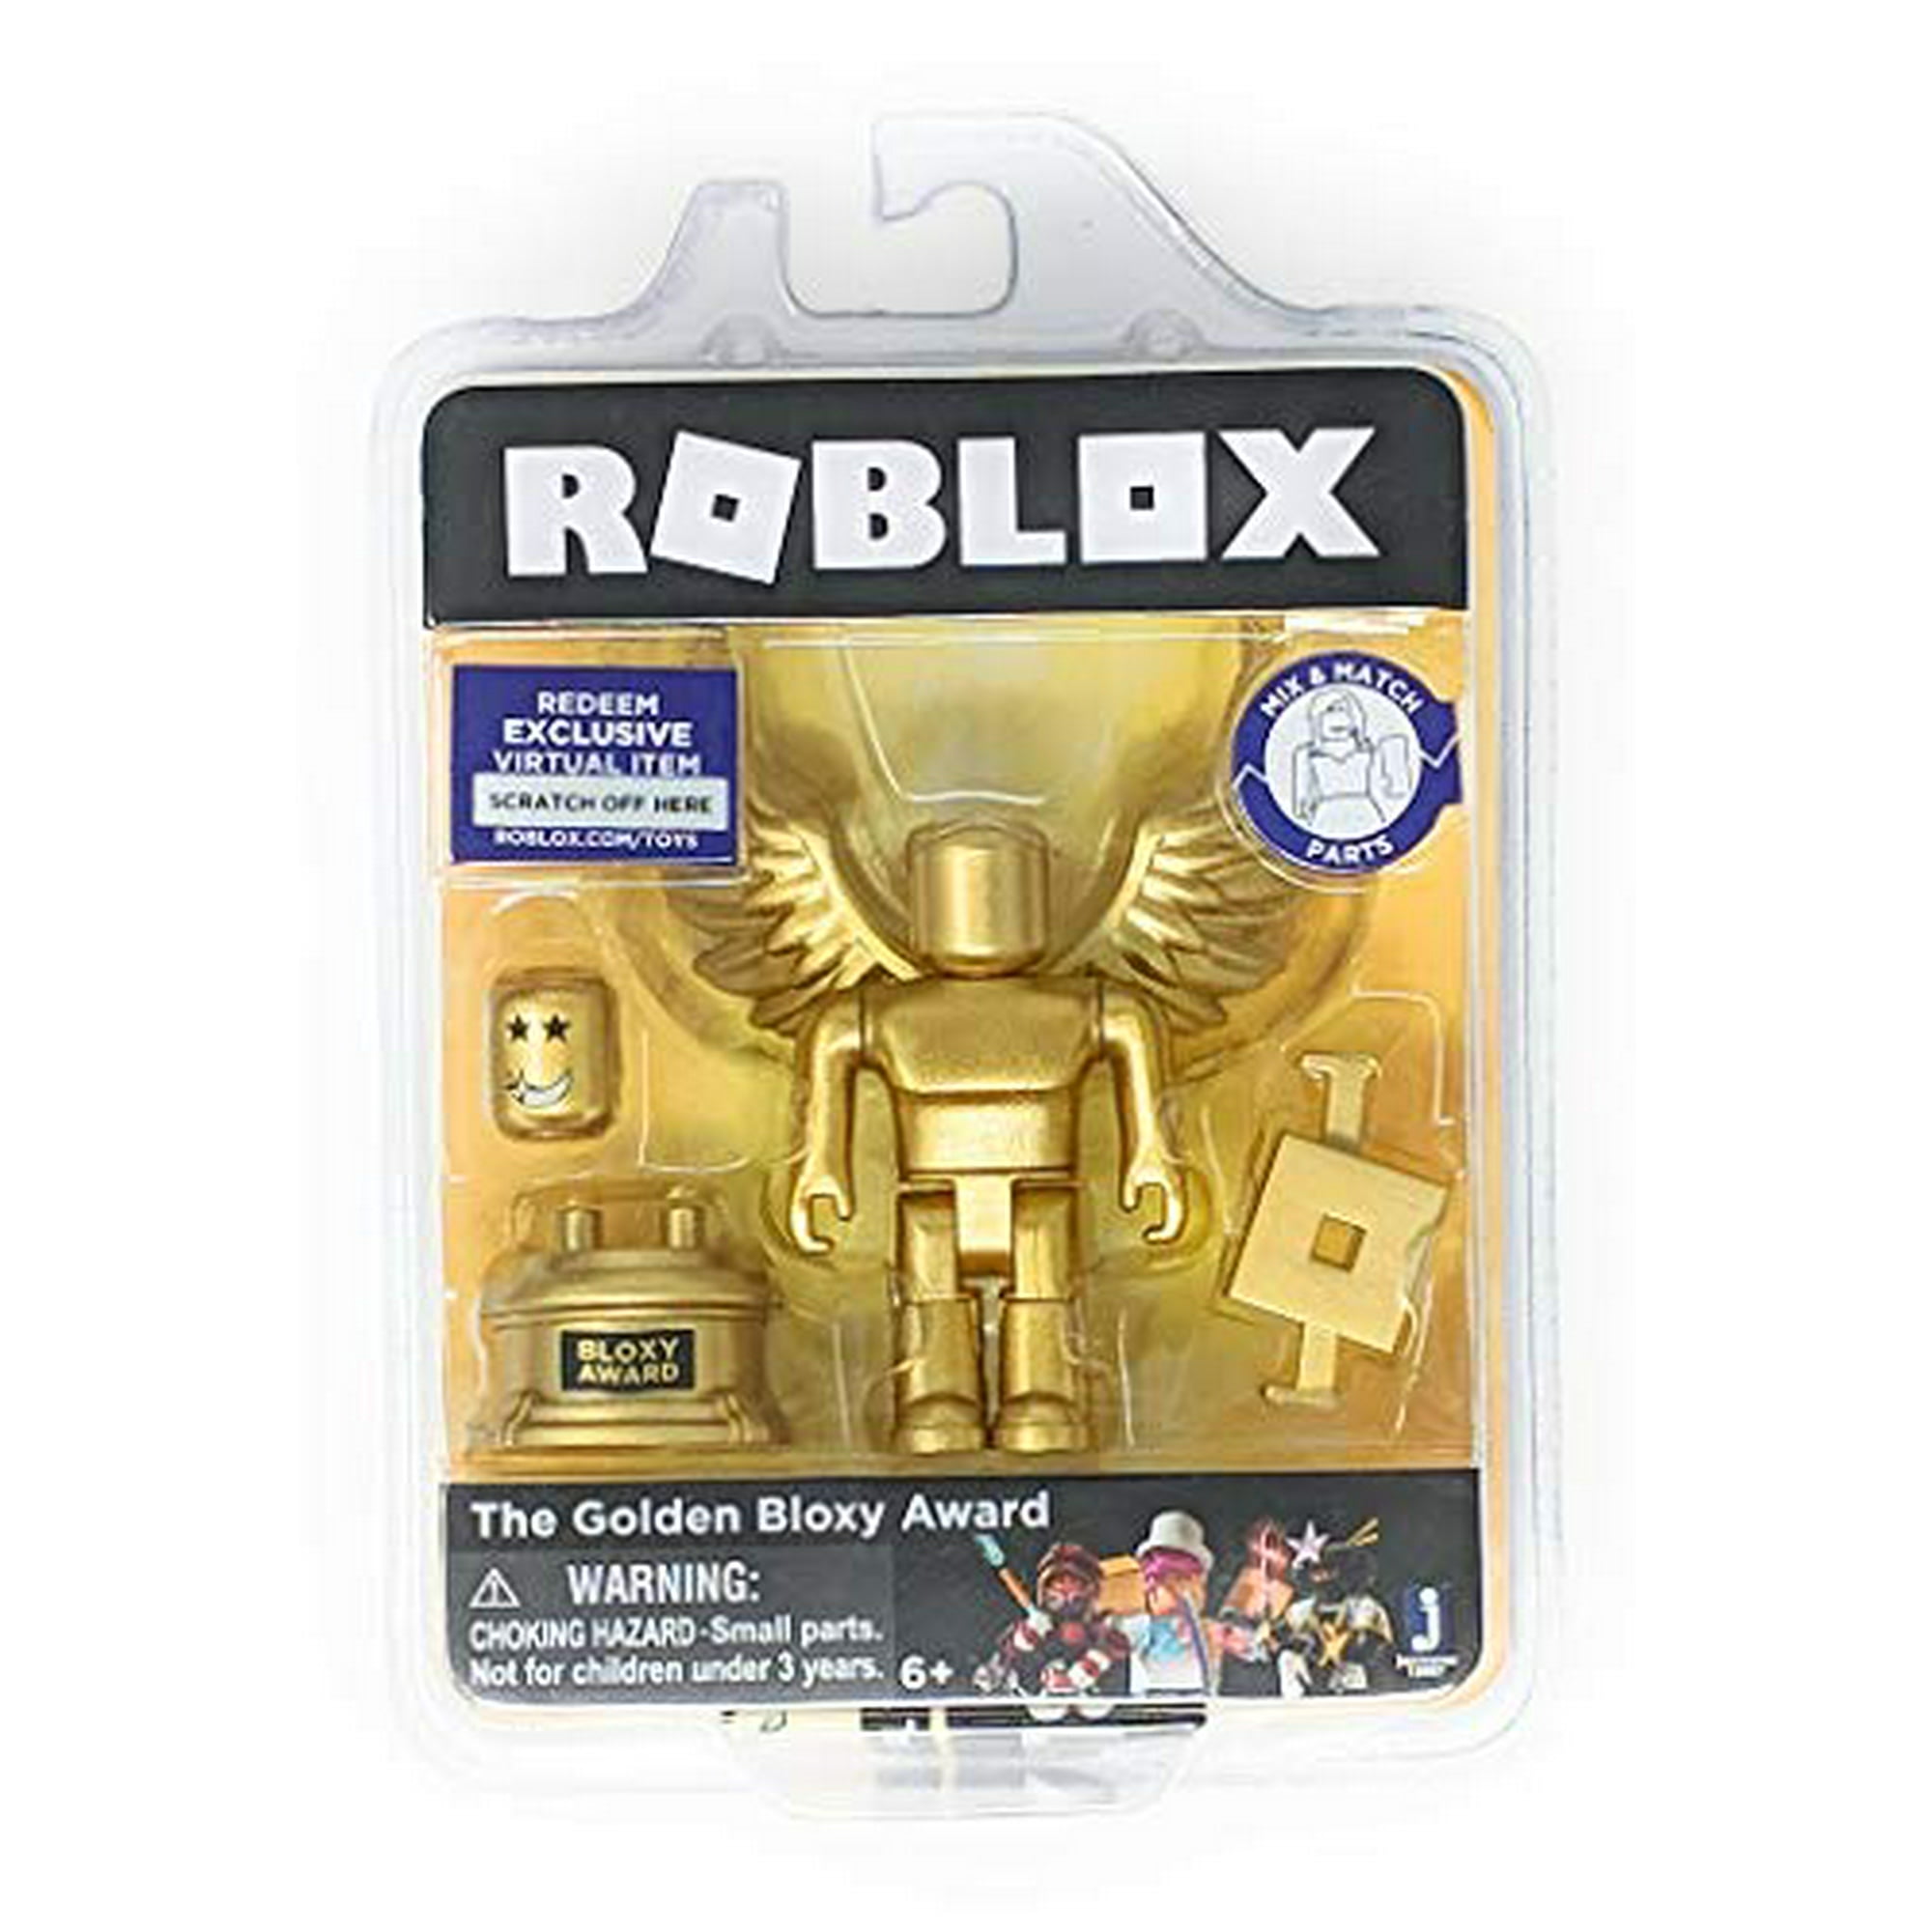 Roblox Gold Collection The Golden Bloxy Award Single Figure Pack With Exclusive Virtual Item Code Walmart Canada - roblox series 4 figurine with virtual item code toys games toys on carousell